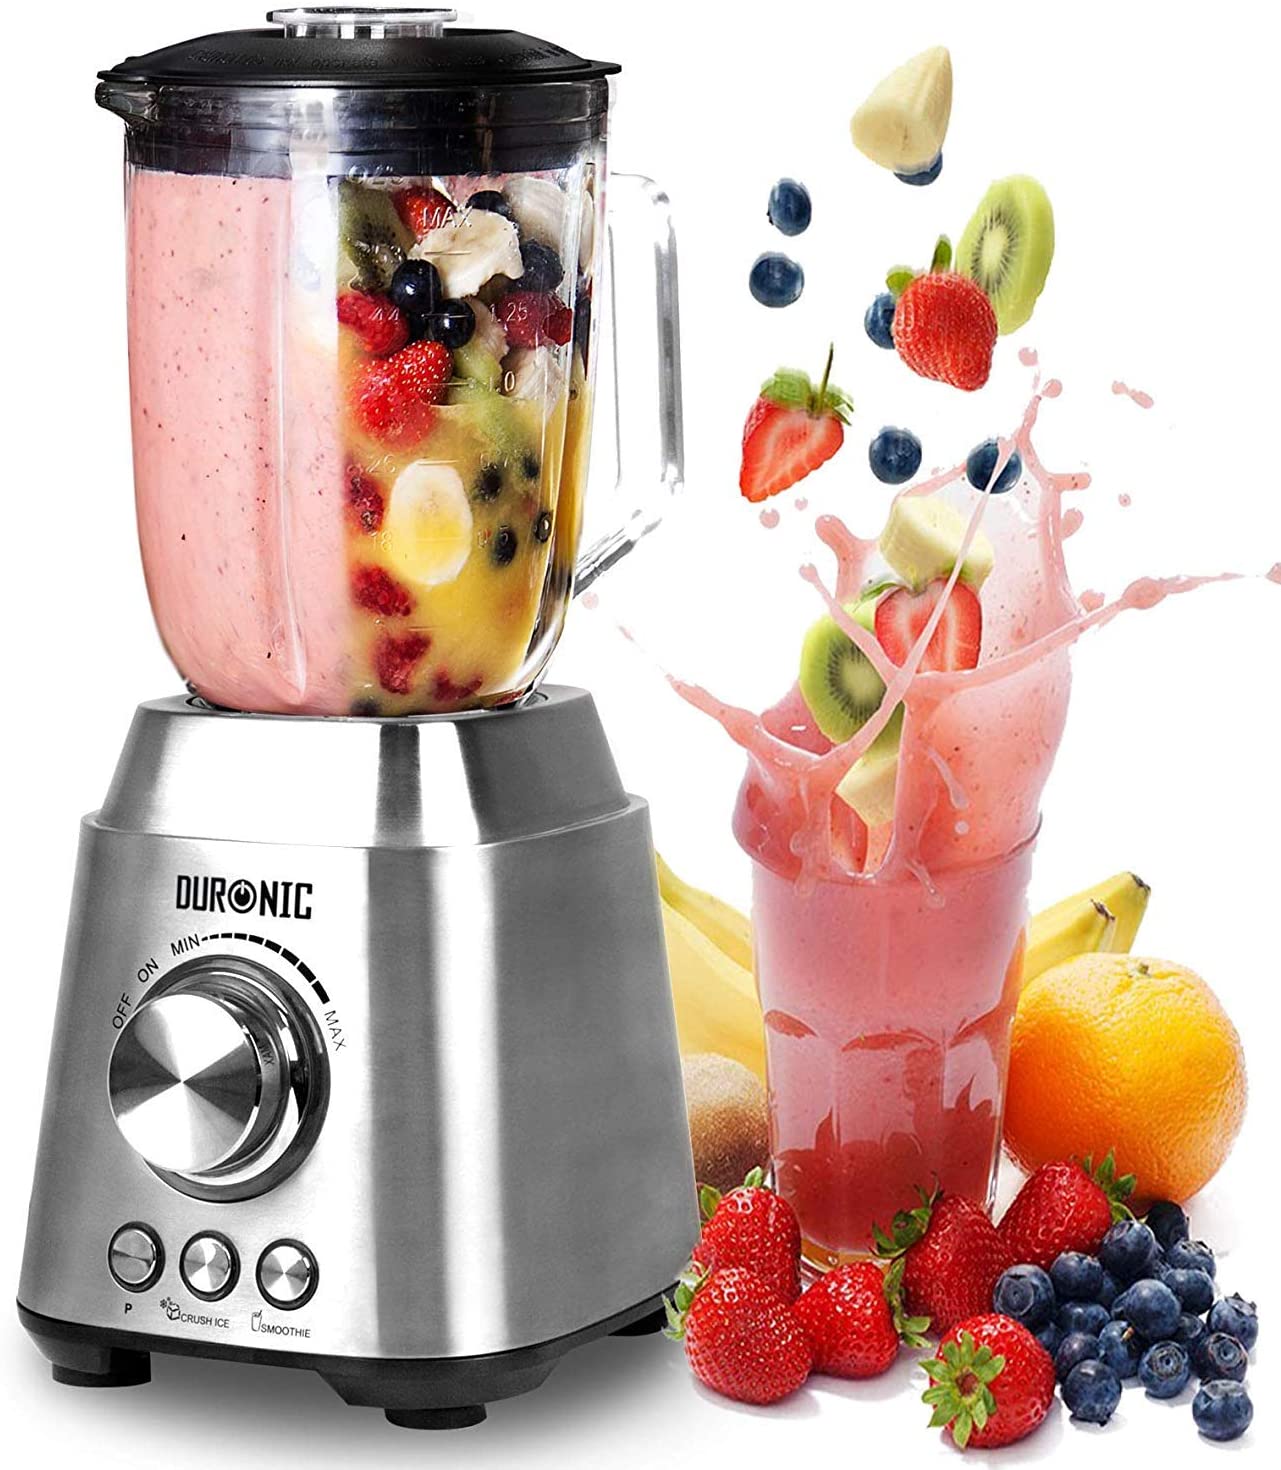 Duronic BL102 Electric Stand Mixer 1000 W | Mixer | High Performance Mixer | Smoothie Maker | Stainless Steel | 1.5 L Glass Jug | Ideal for Smoothies, Frappe, Lassi, Cocktails, Fitness Drinks, Fruit, Vegetables